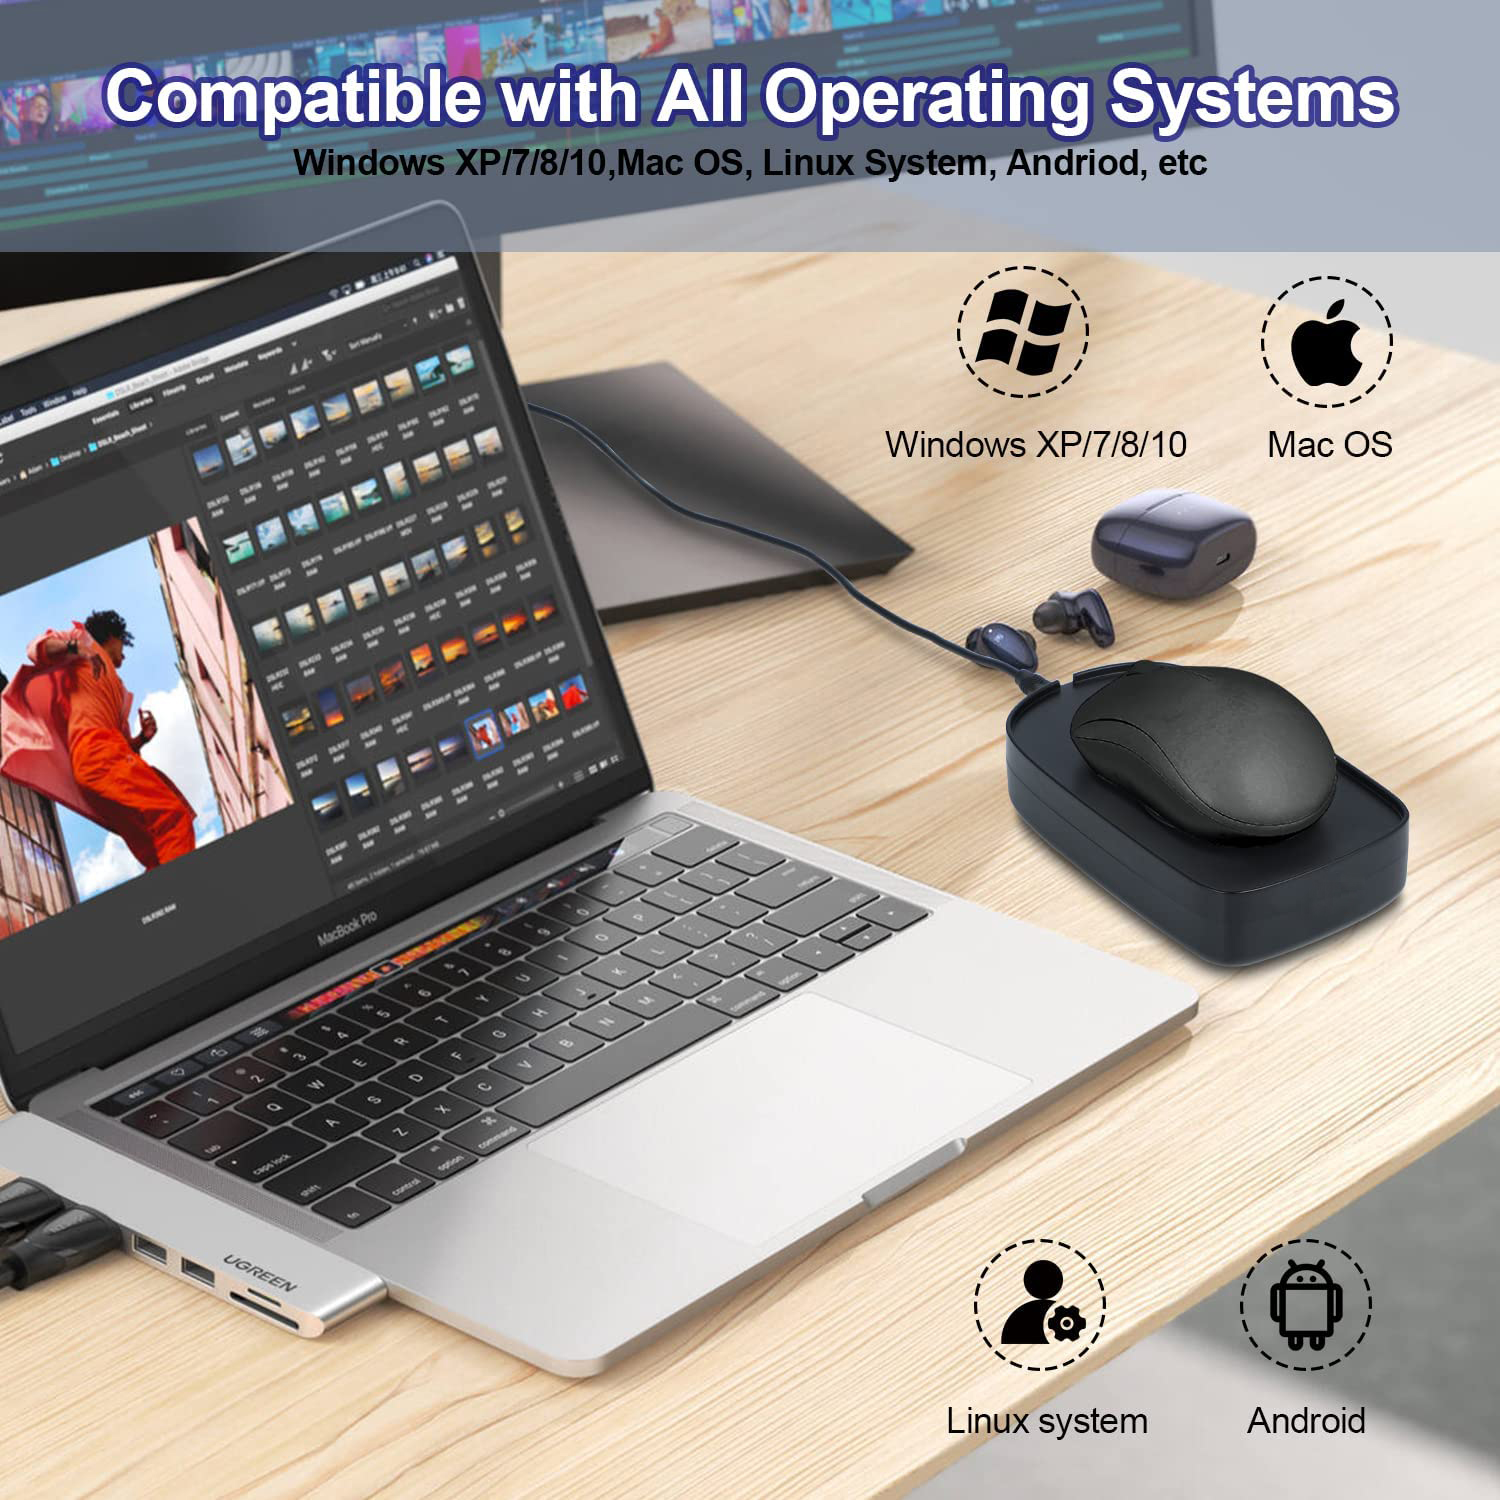 Undetectable-Mouse-Mover-Mouse-Jiggler-Keeps-PC-Active-No-Software-Randomly-Automatically-Driver-Free-Prevents-Computer-Laptops-From-Sleeping-Mode-34